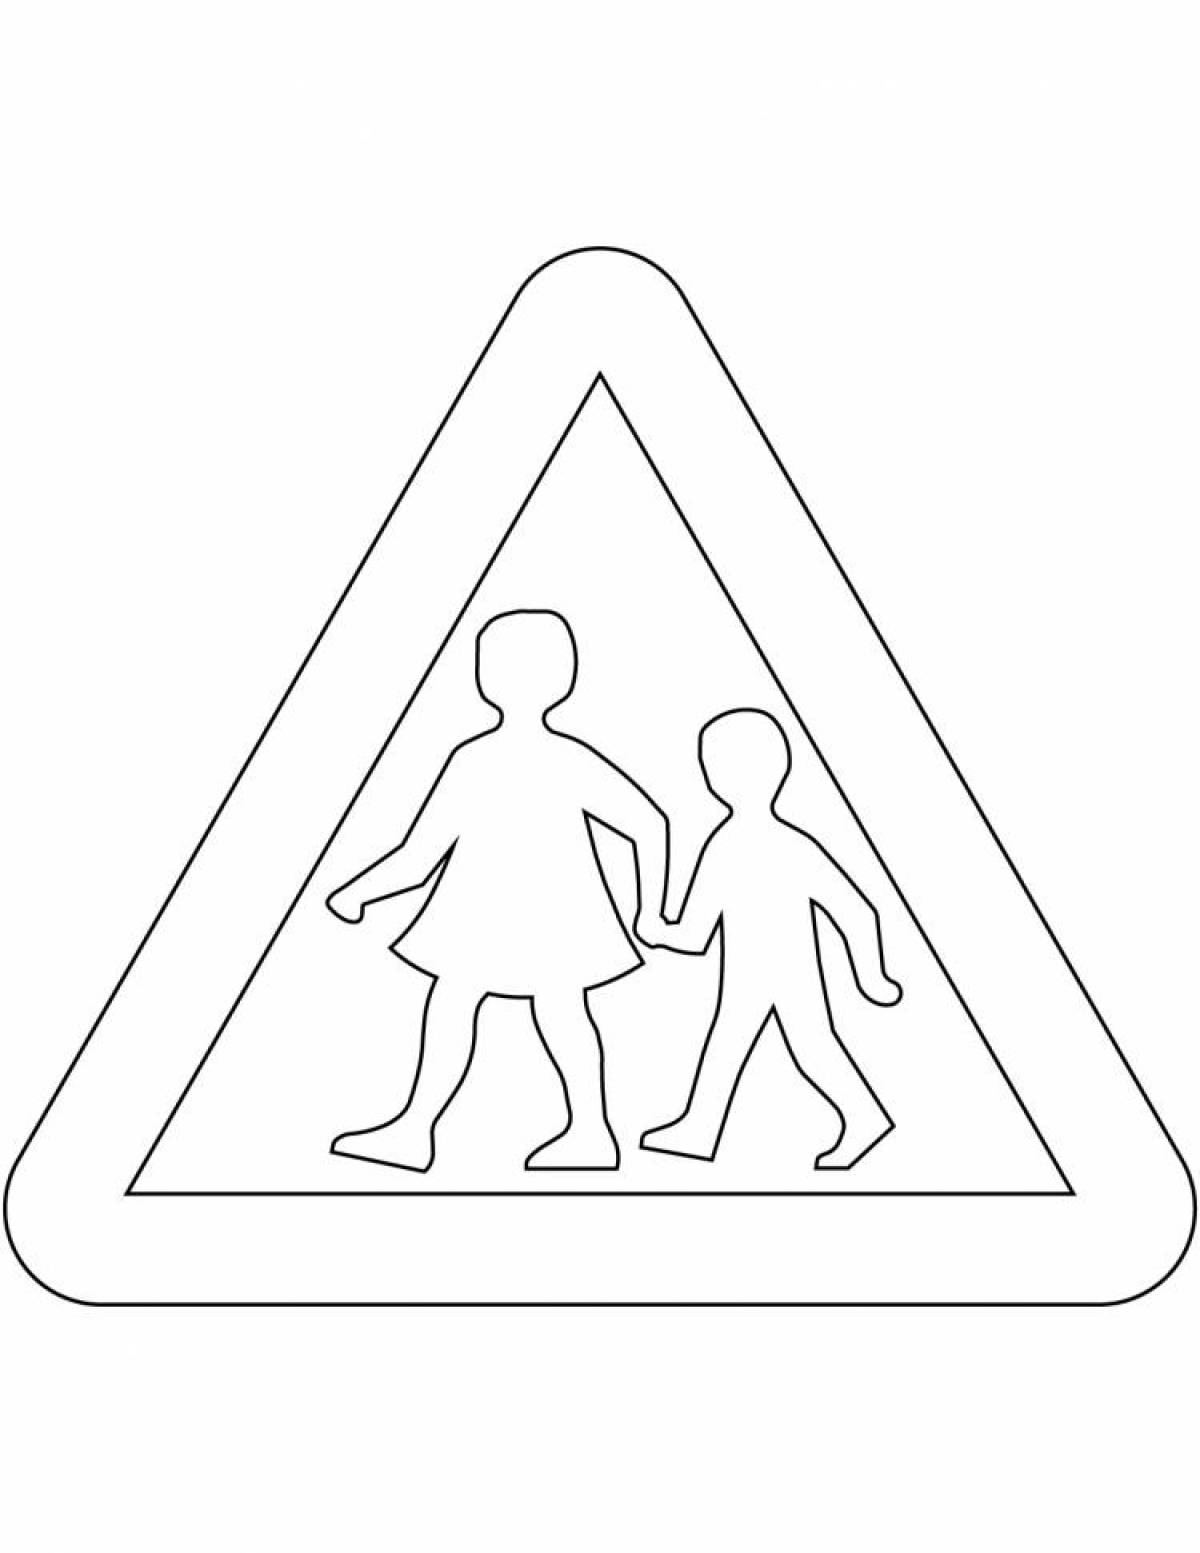 Traffic signs for kids #22